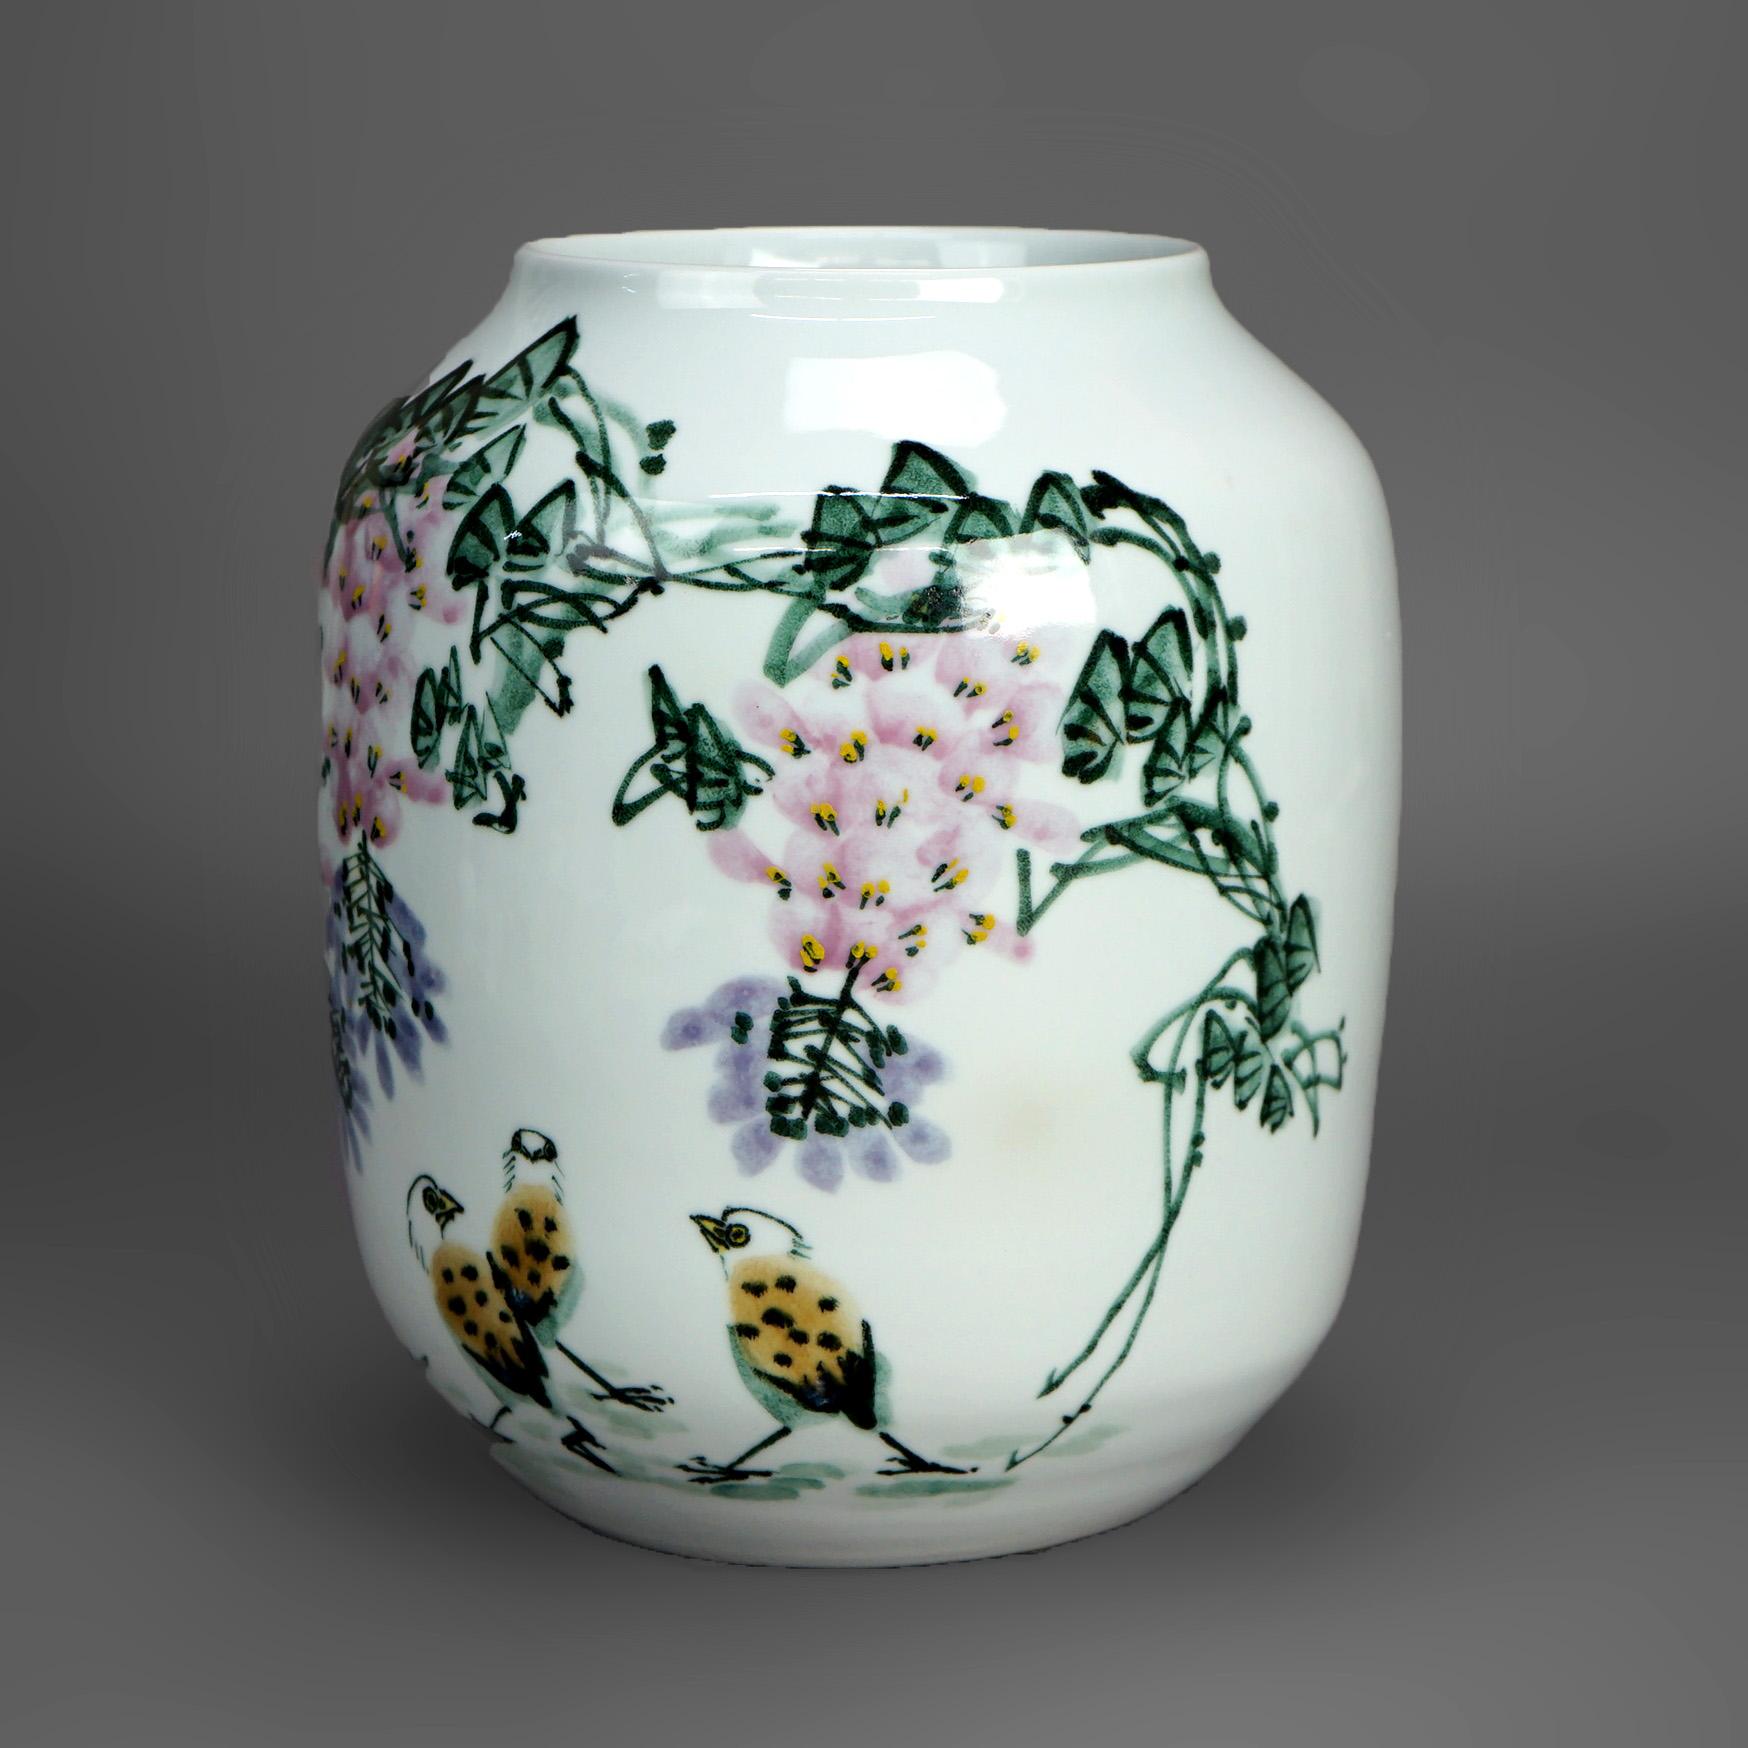 Chinese Jingdezhen Porcelain Jar Vase with Hand Painted Myrtle Design 20thC In Good Condition For Sale In Big Flats, NY